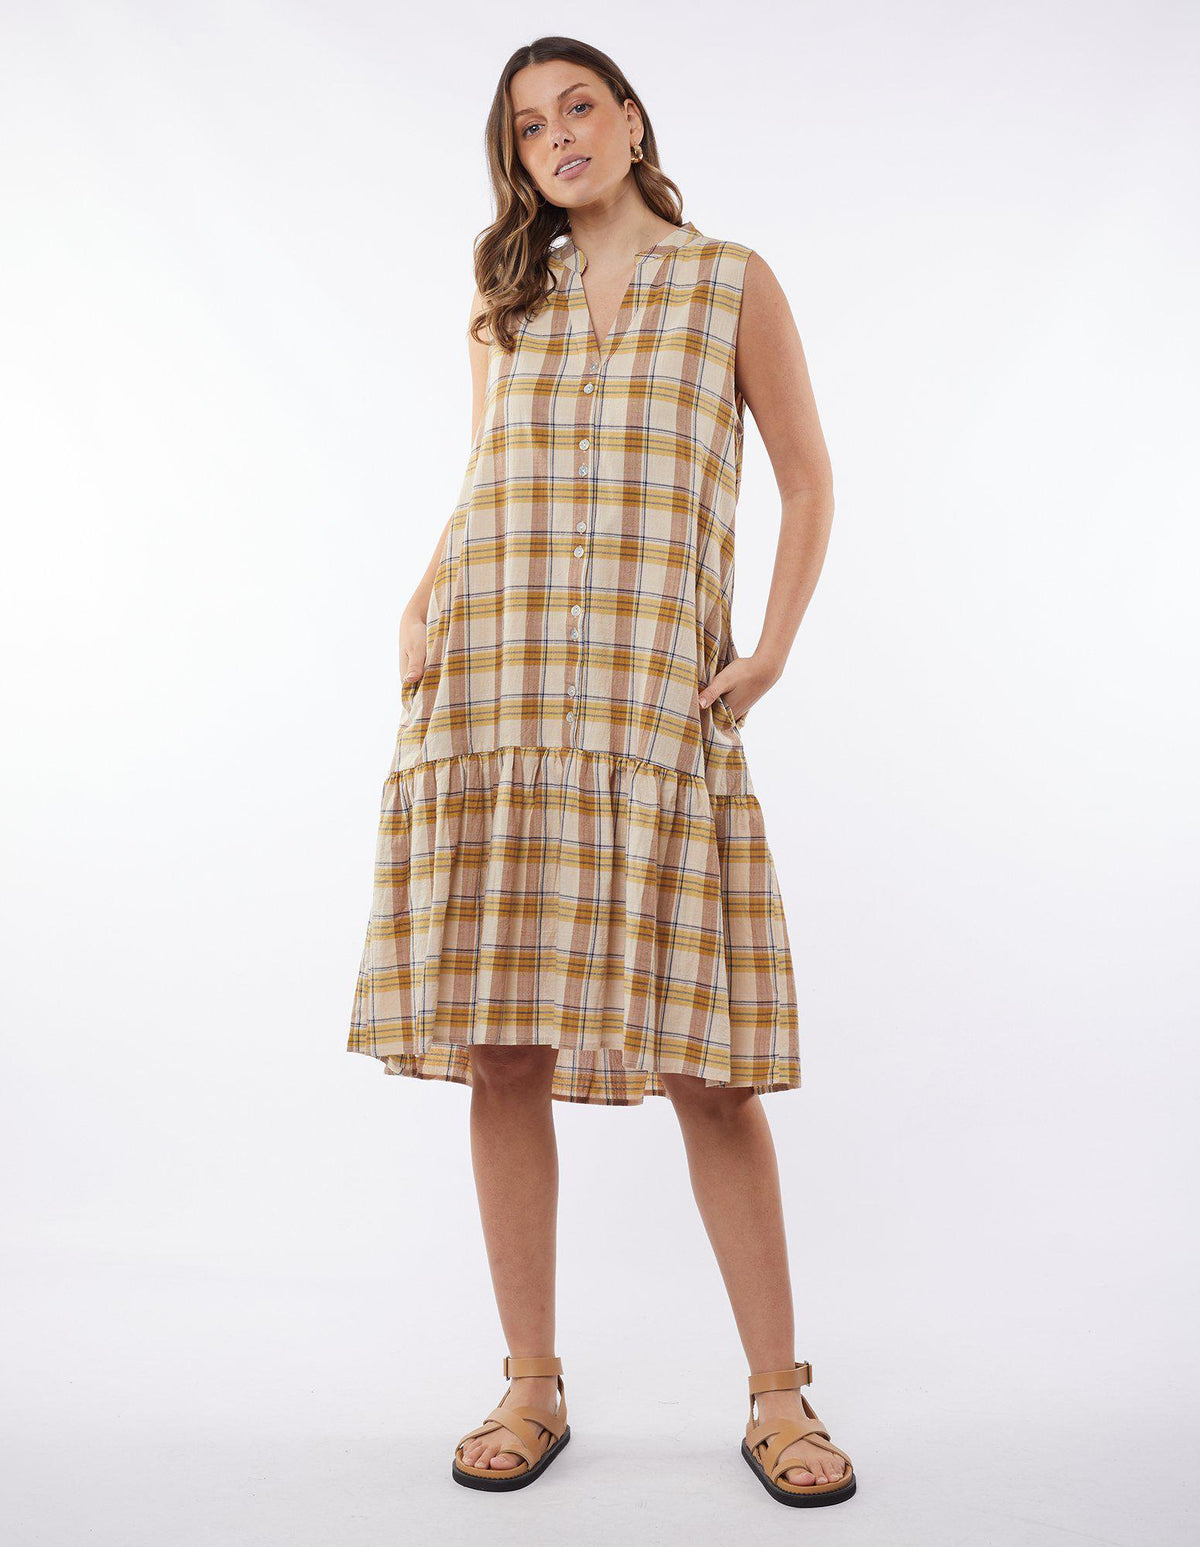 Summer Days Dress - Natural Check - Foxwood - FUDGE Gifts Home Lifestyle